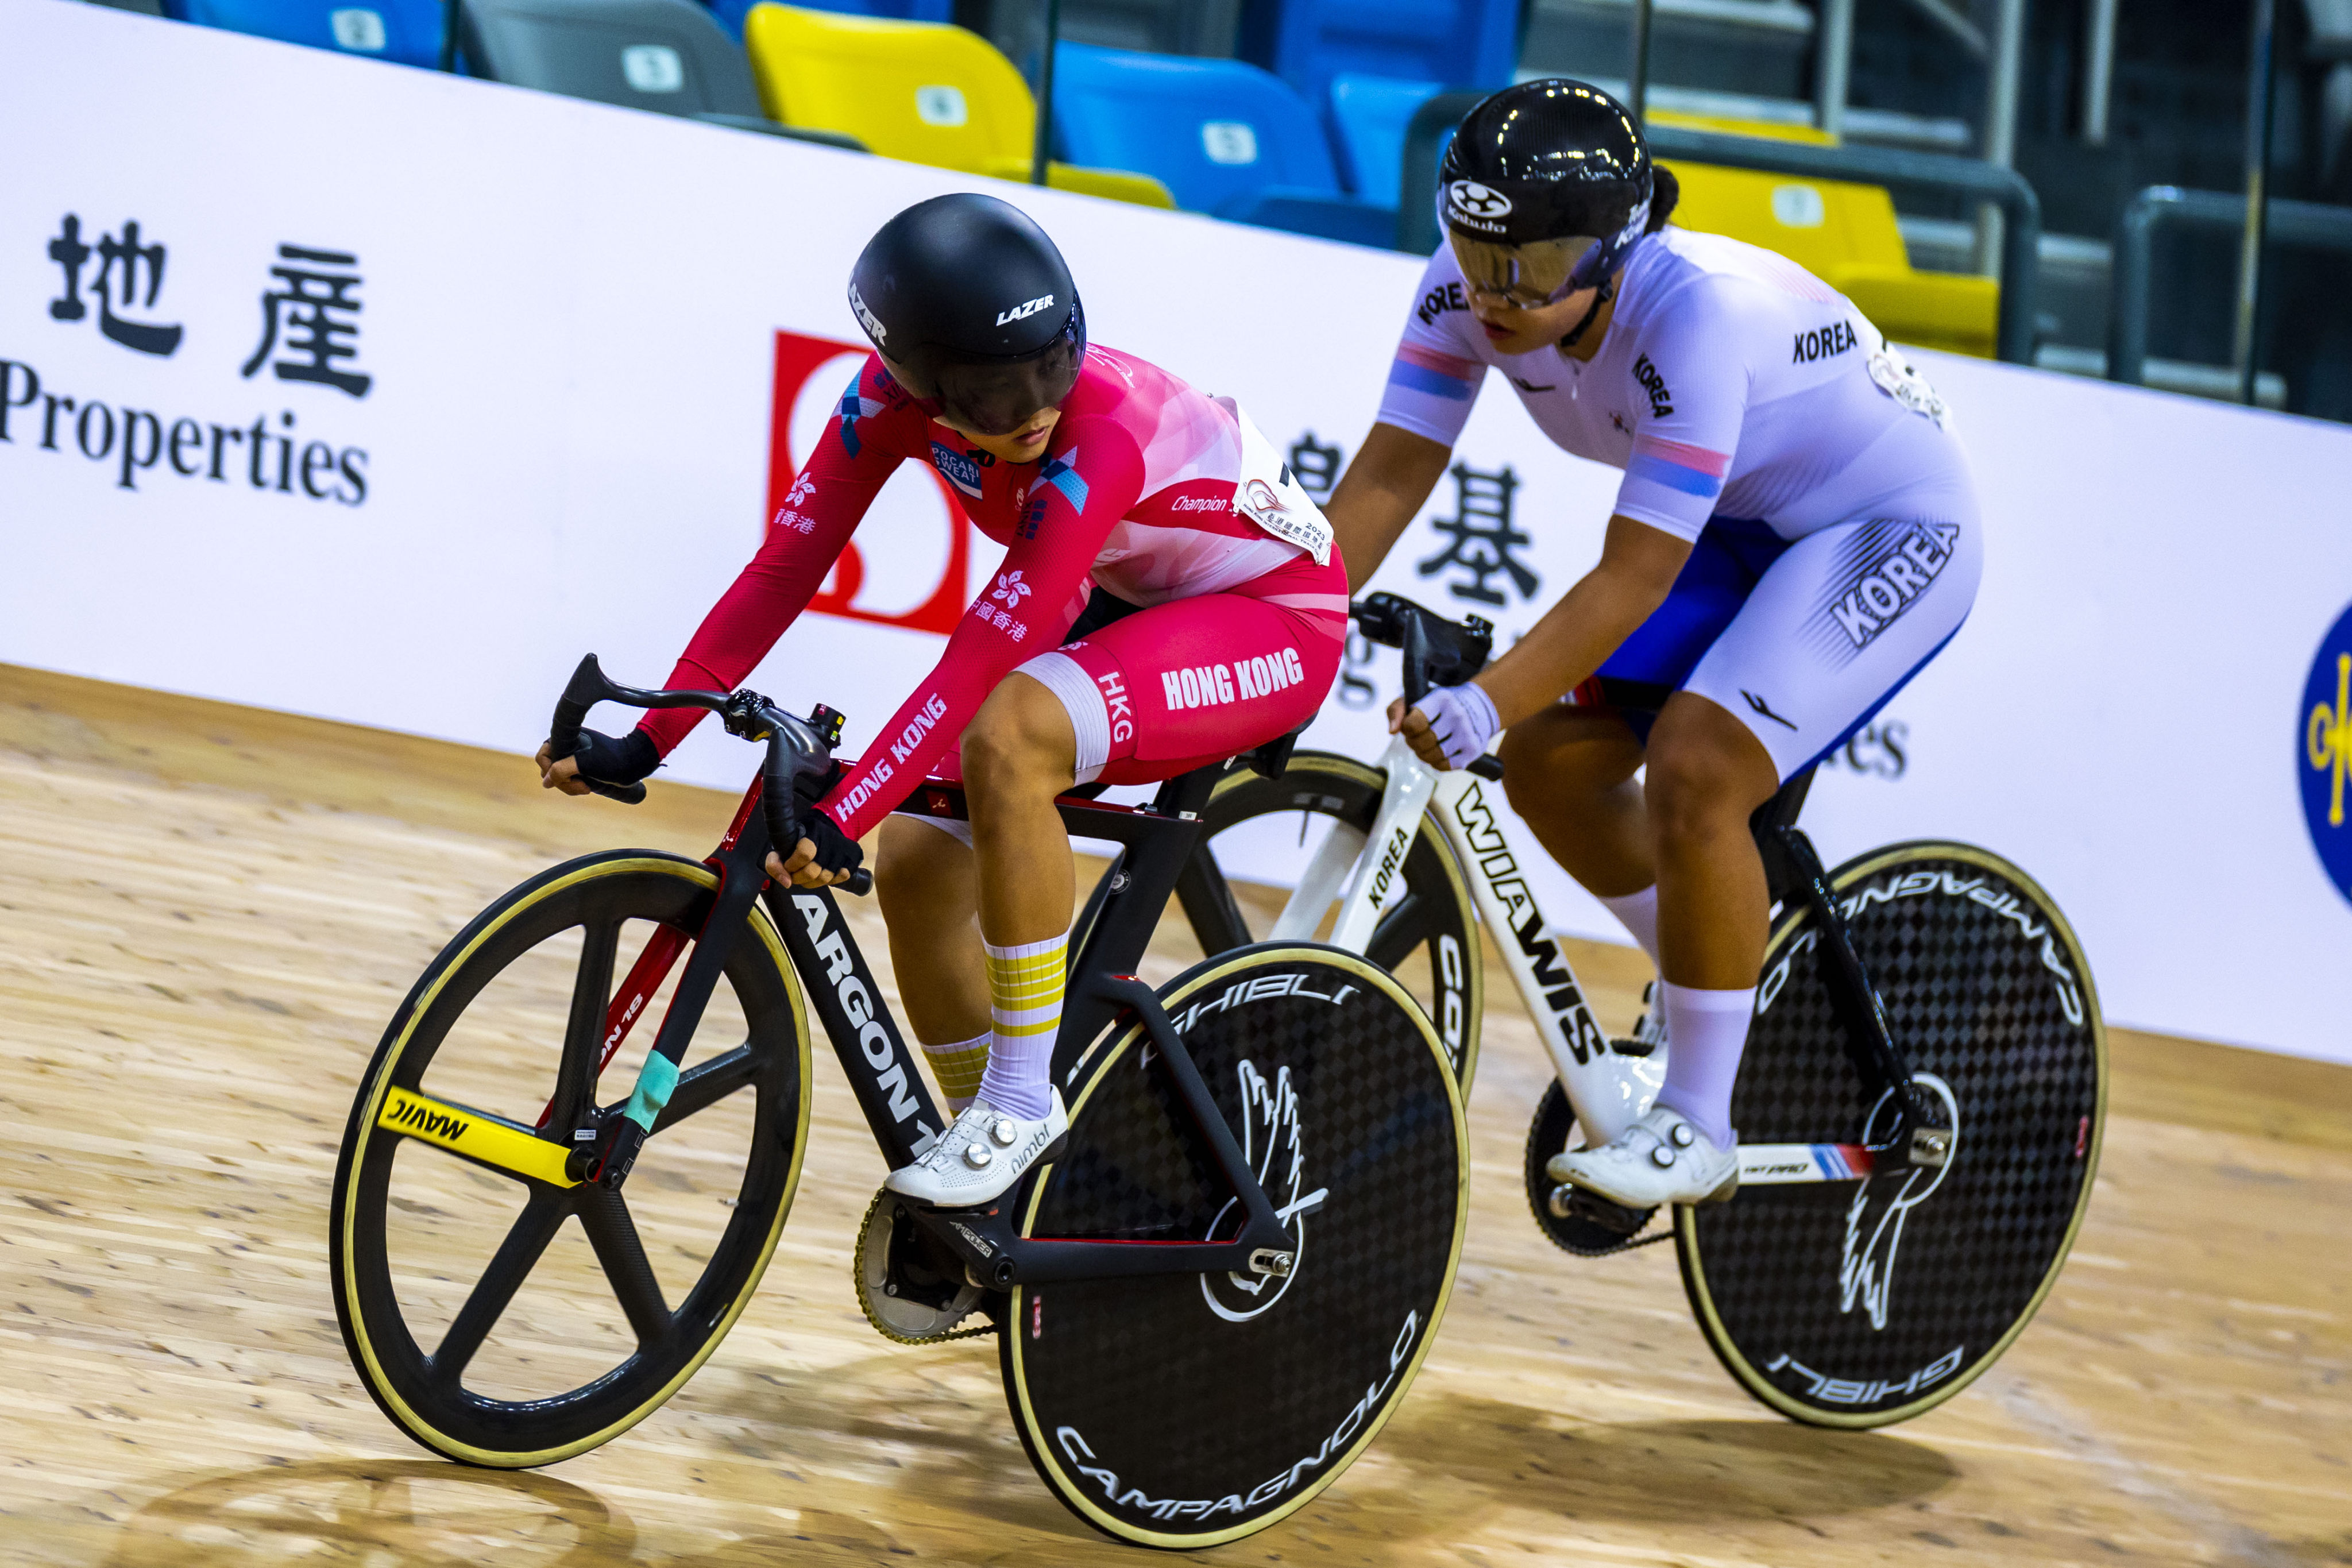 Lee Sze-wing (left) and Shin Ji-eun of South Korea in the points race of the omnium. Photo: HKCA